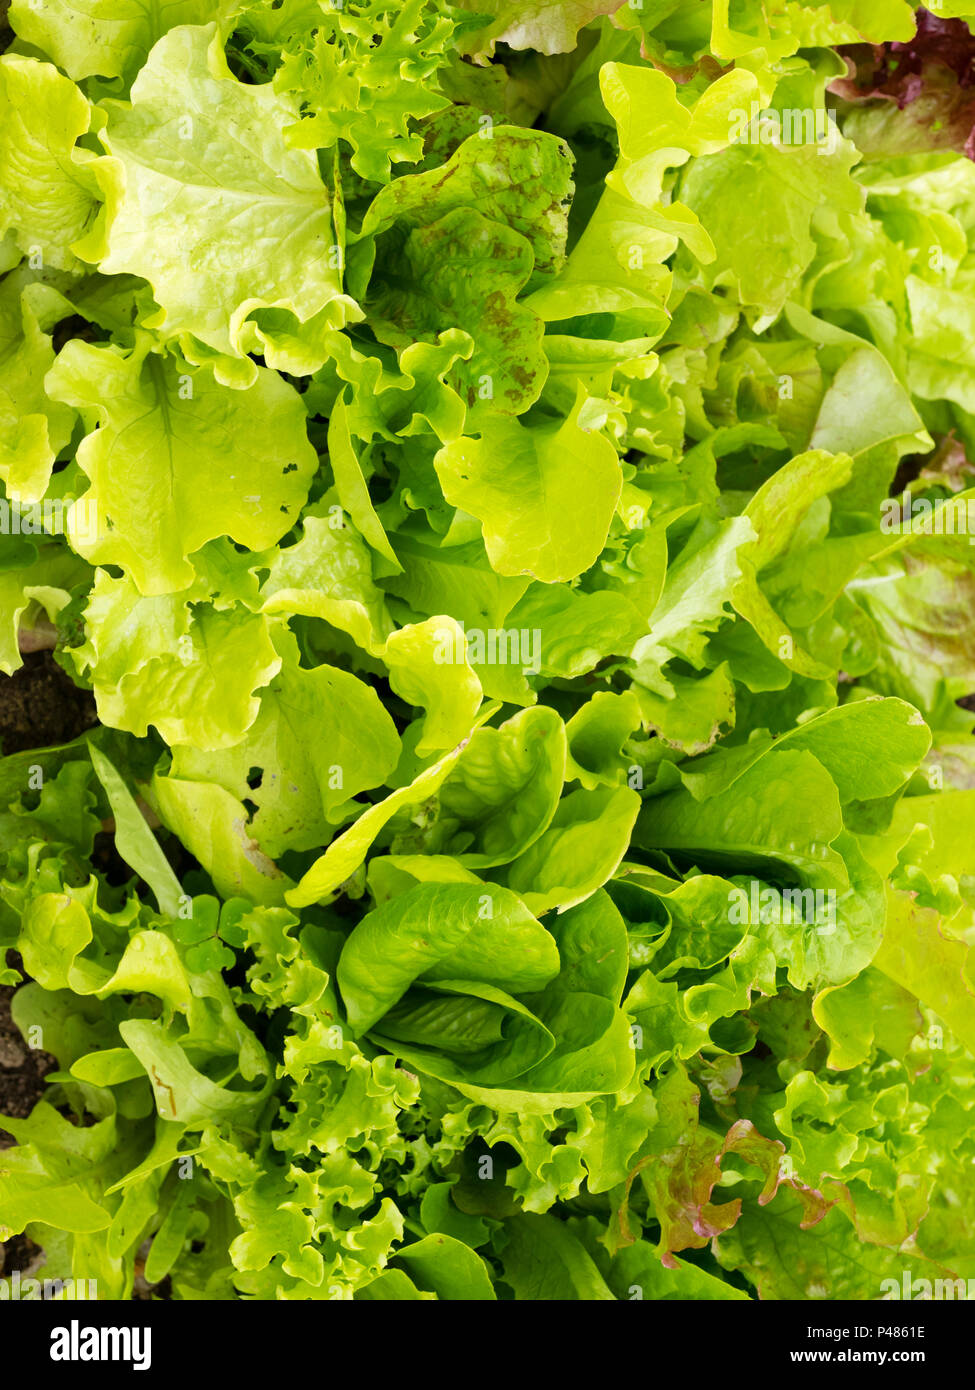 Mixed salad leaves of the 'Rocky Top mix' lettuce strain, Lactuca sativa, in the summer garden Stock Photo